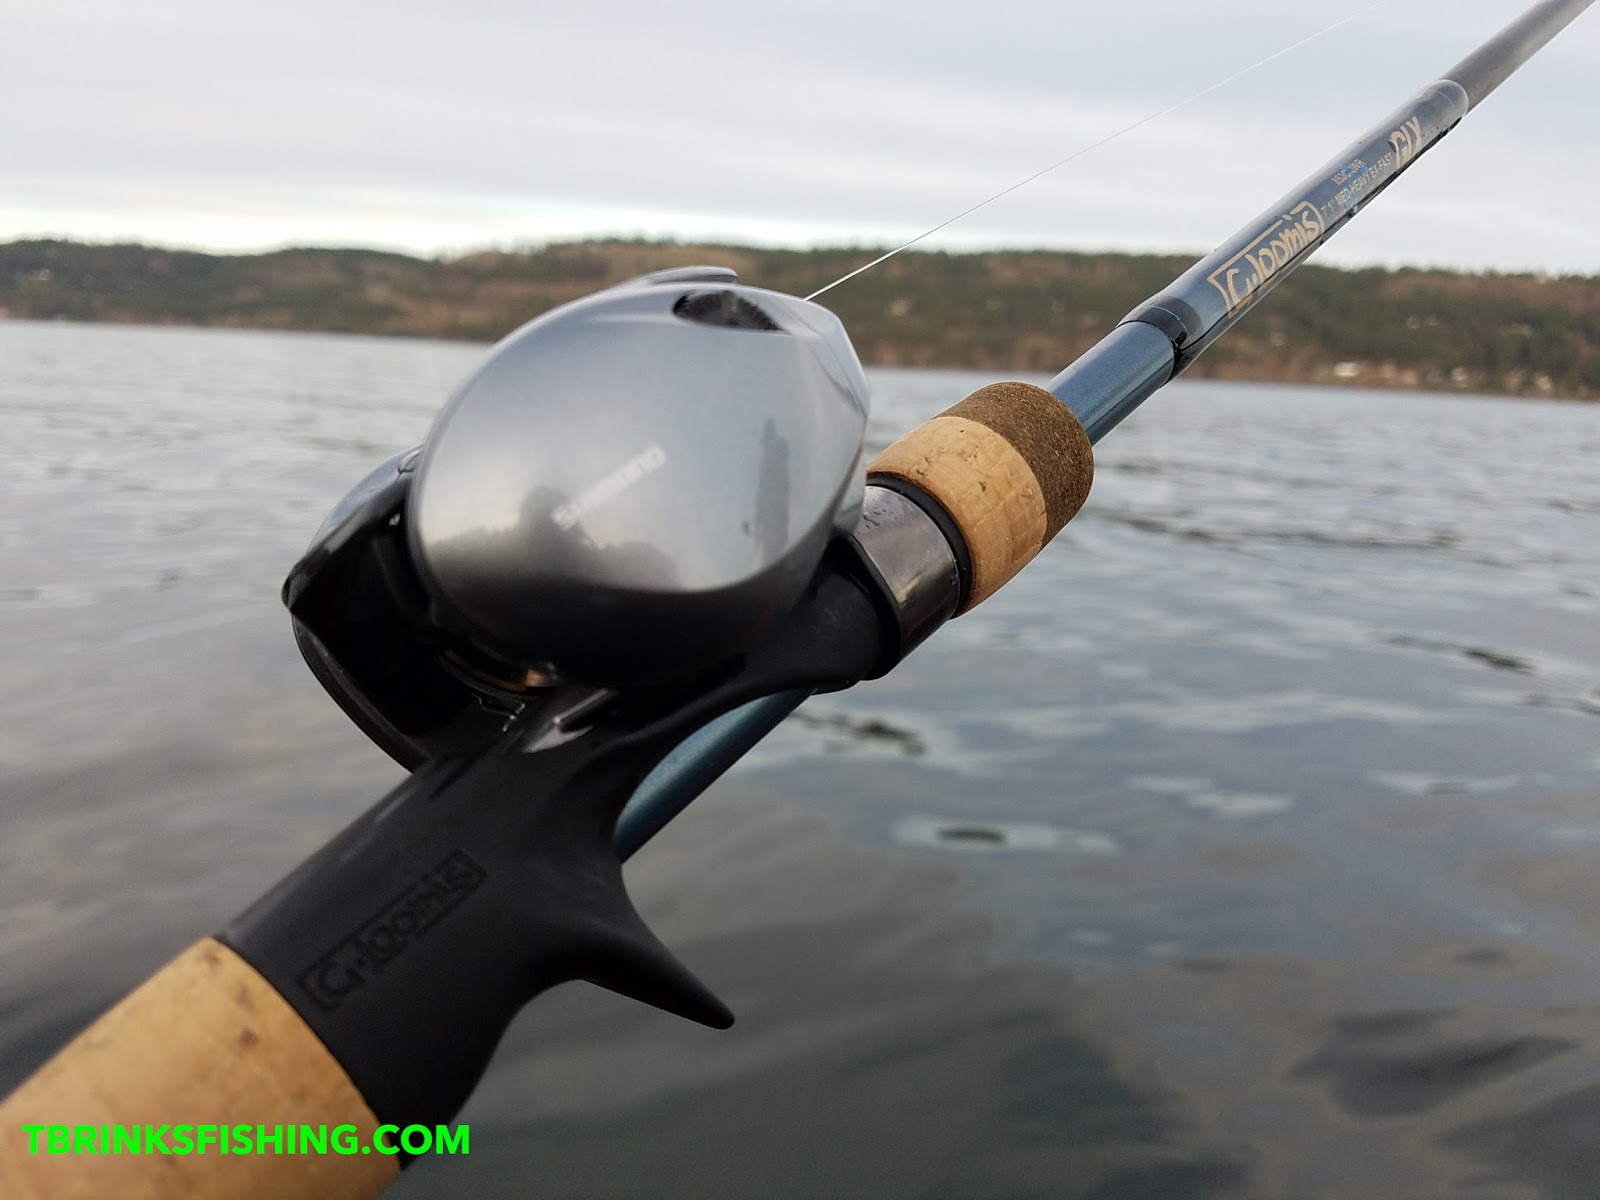 T Brinks Fishing: A Review of the New G. Loomis GLX